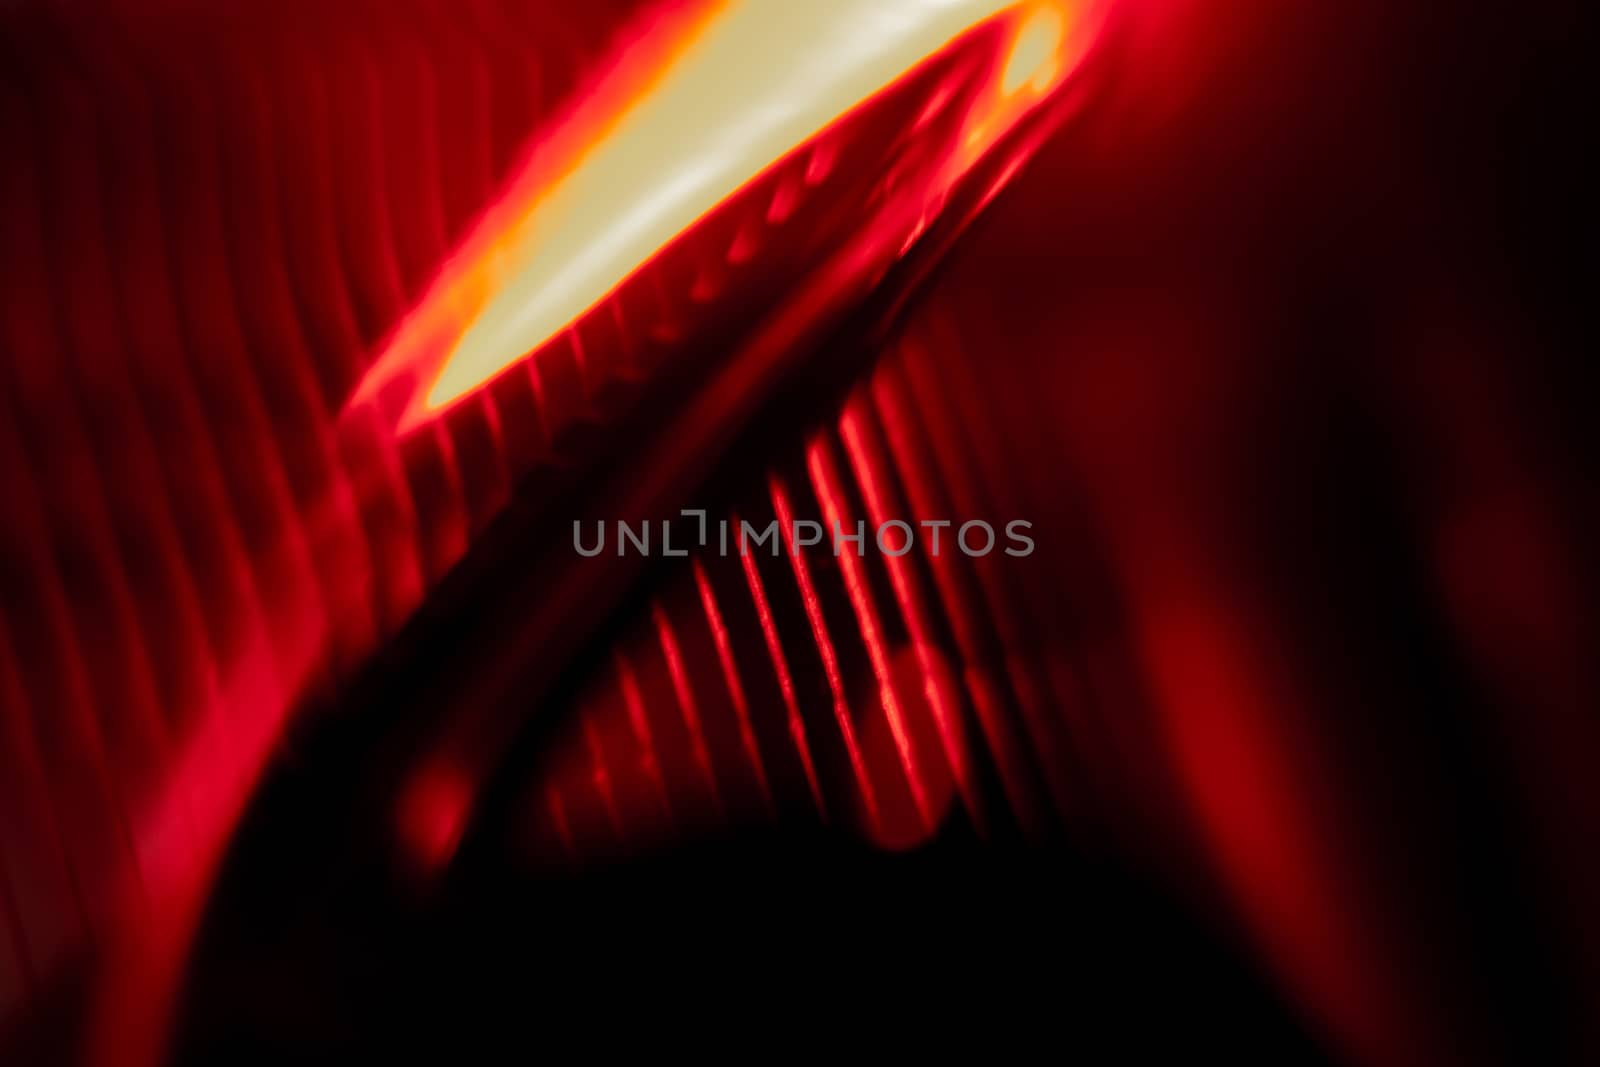 Colorful red led lights inside a computer result in this powerful abstracts images